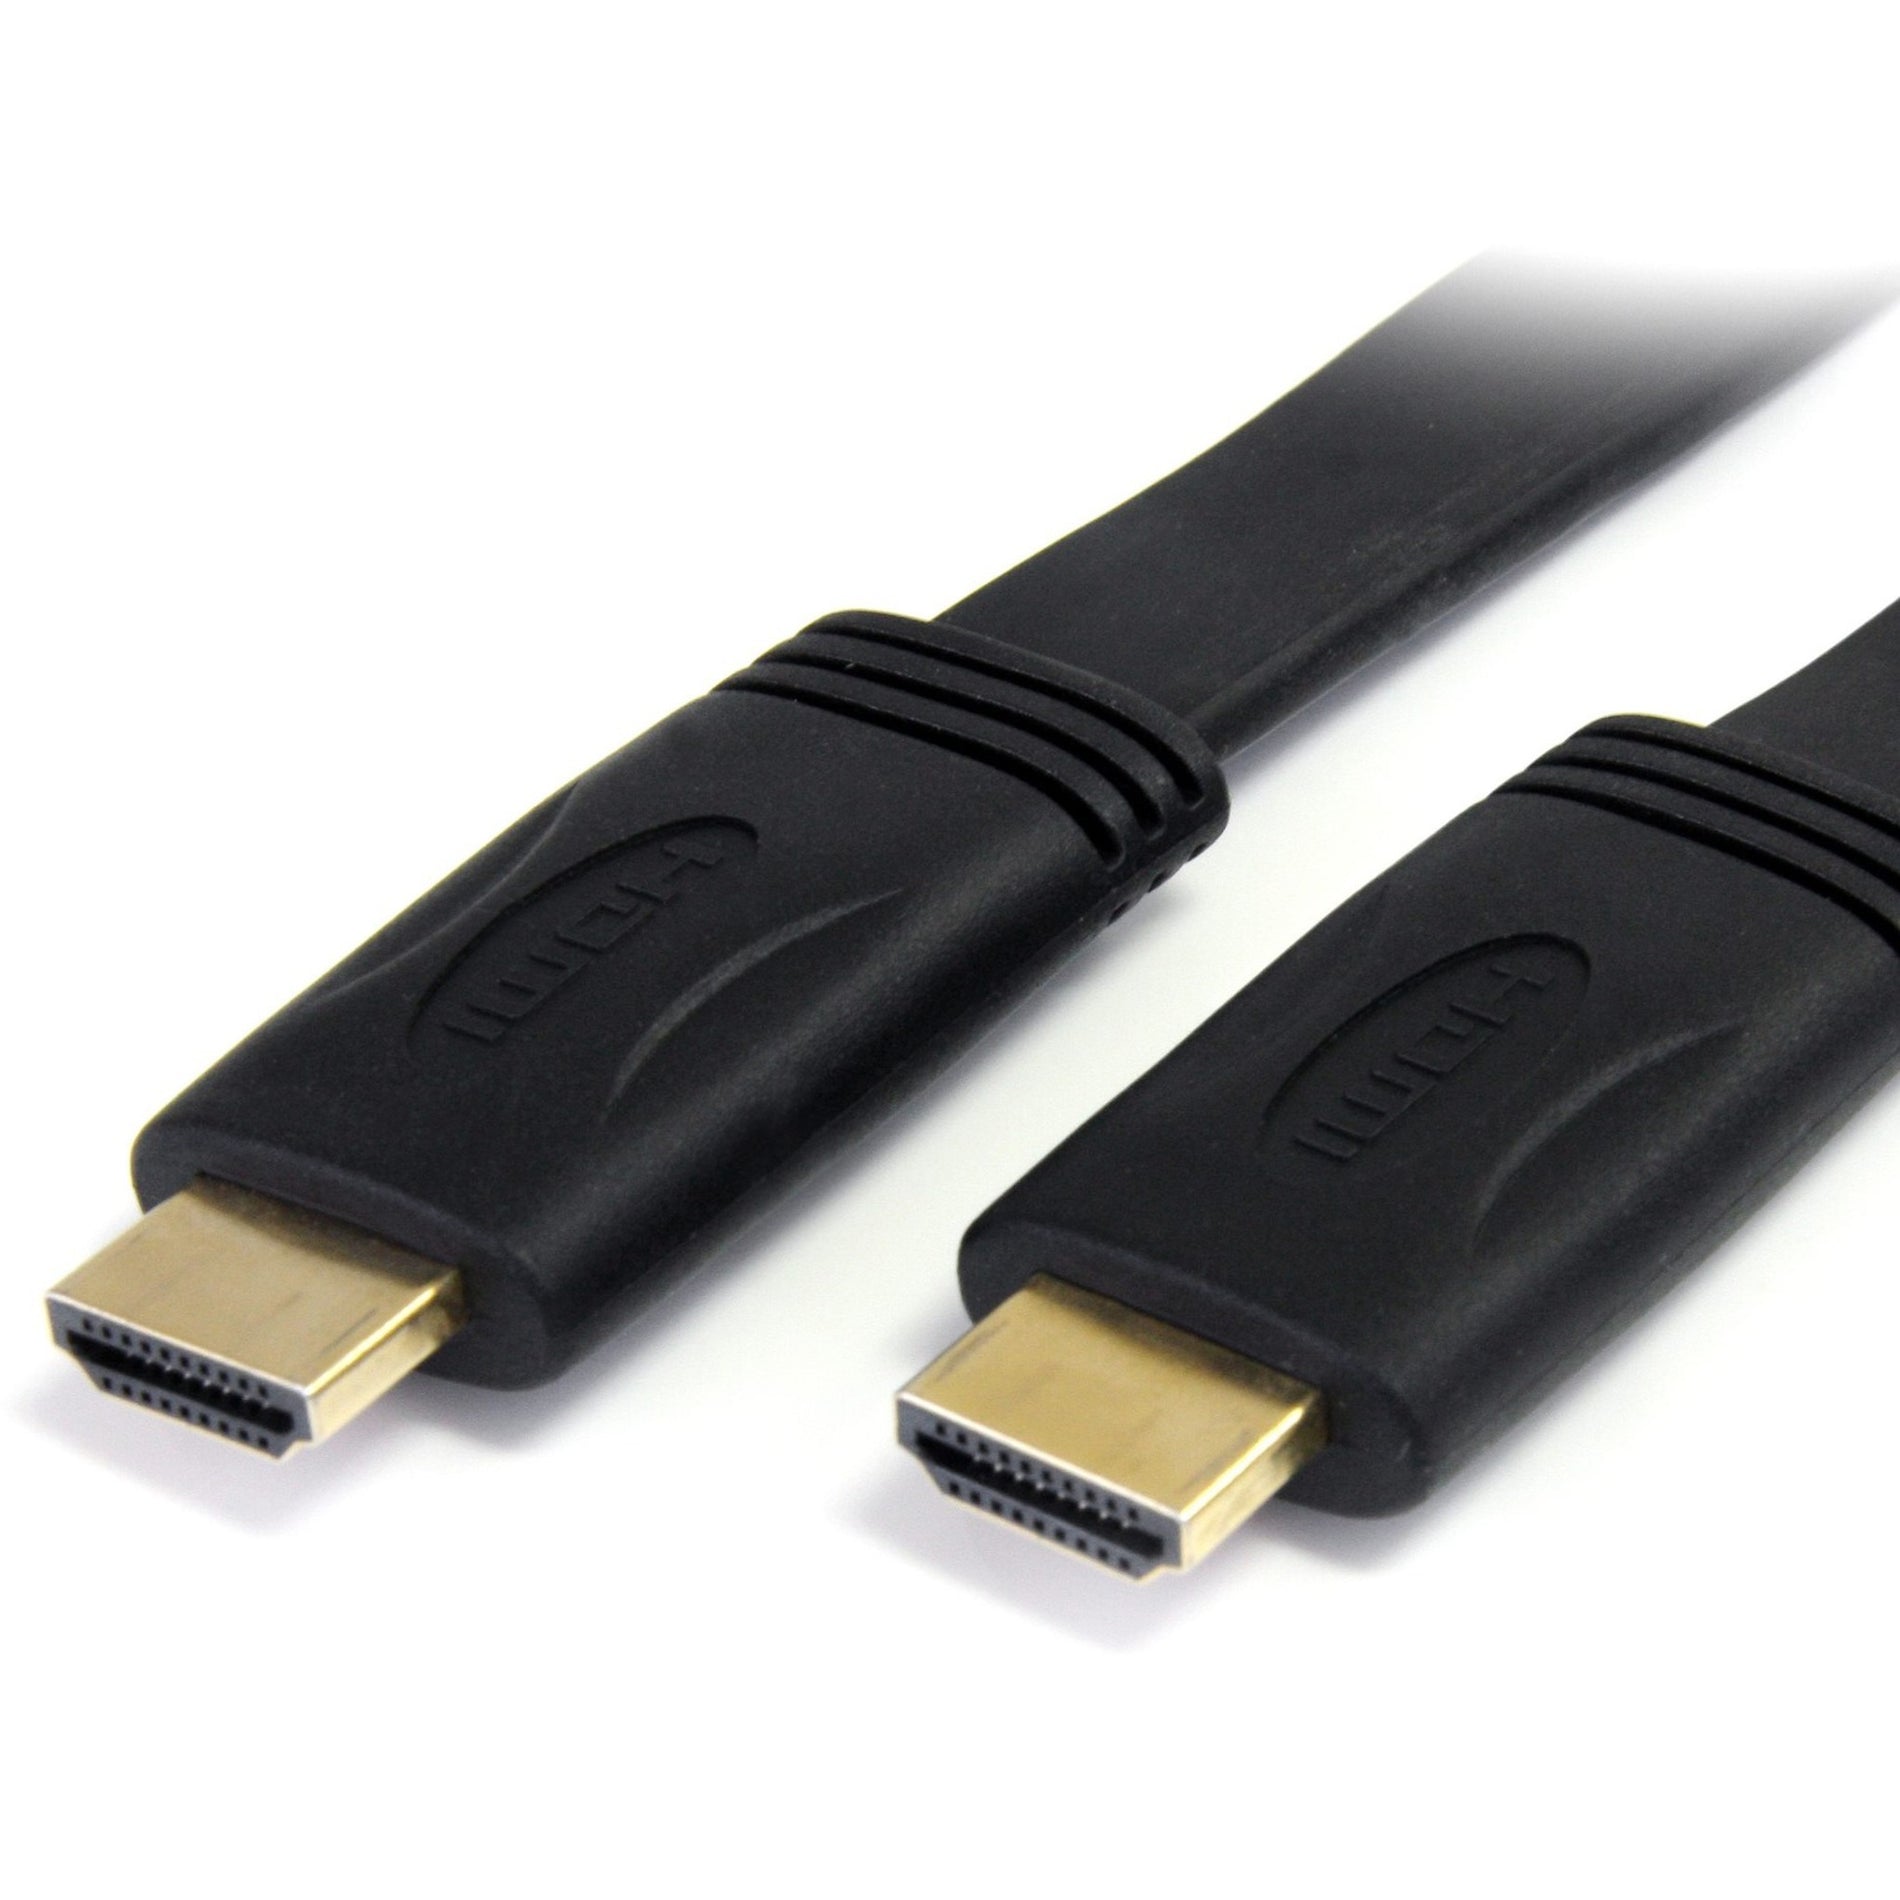 StarTech.com HDMIMM10FL 10 ft High Speed Flat HDMI Digital Video Cable with Ethernet, Corrosion Resistant, Gold Plated Connectors